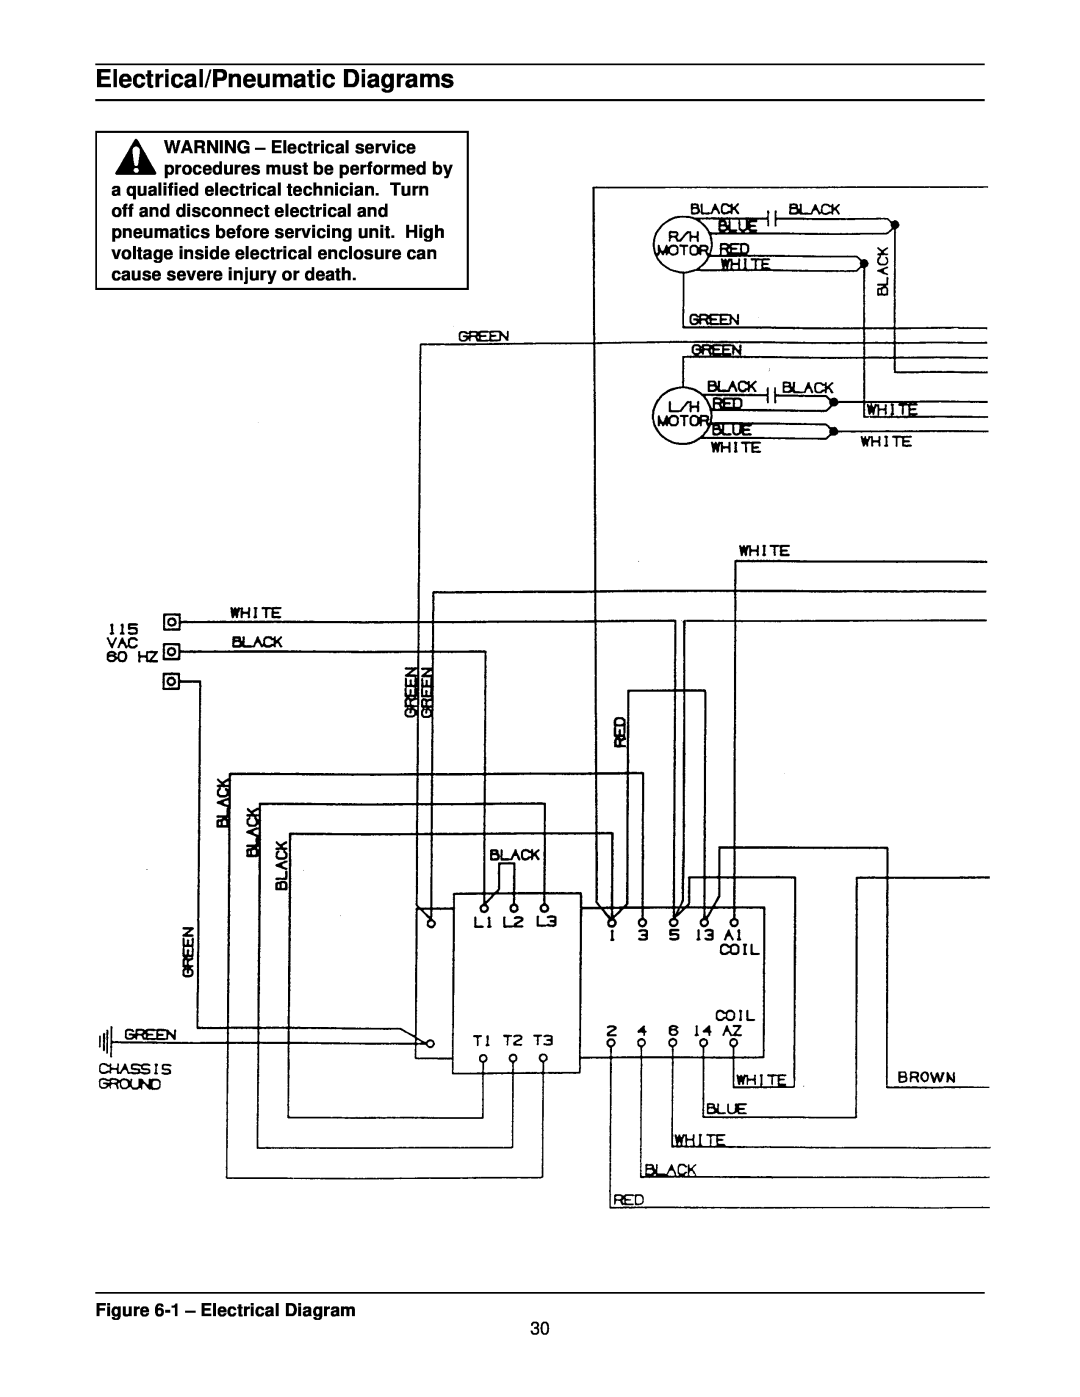 3M 800r3 manual Electrical/Pneumatic Diagrams, WARNING - Electrical service procedures must be performed by 